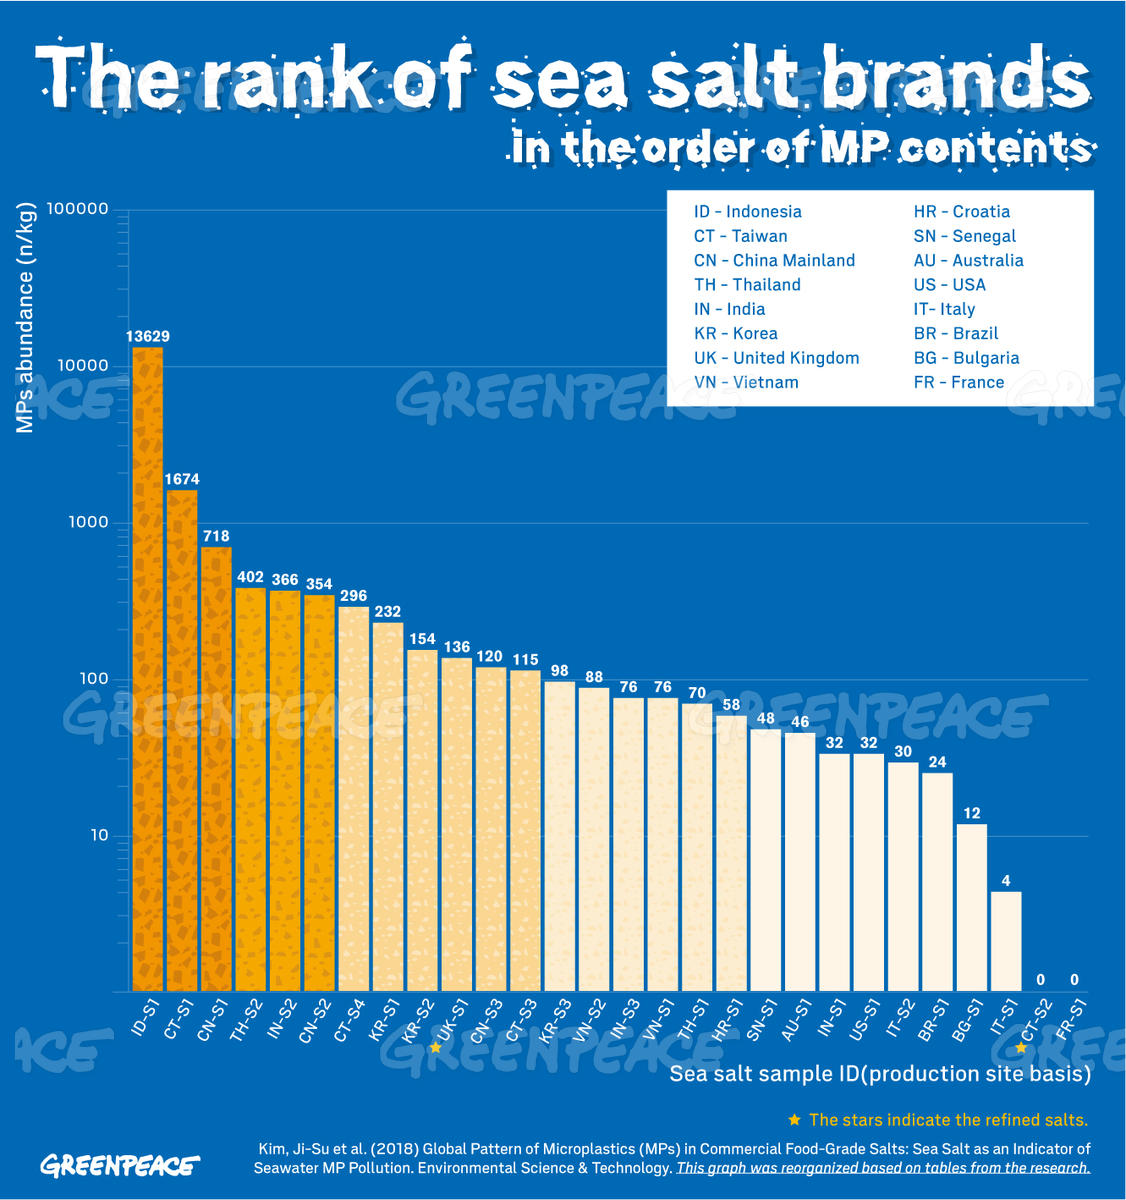 Rank of Sea Salt Brands in the Order of Microplastics Contents  Infographic shows the ranking of sea salt brands in the order of microplastics content. The data is from a study called “Global Pattern of Microplastics (MPs) in Commercial Food-Grade Salts" which found positive correlations between microplastics in seawater and microplastics in sea salts which people consume everyday. Greenpeace is urging corporations around the world to reduce and eventually phase out single-use plastics. CREDIT: © Greenpeace